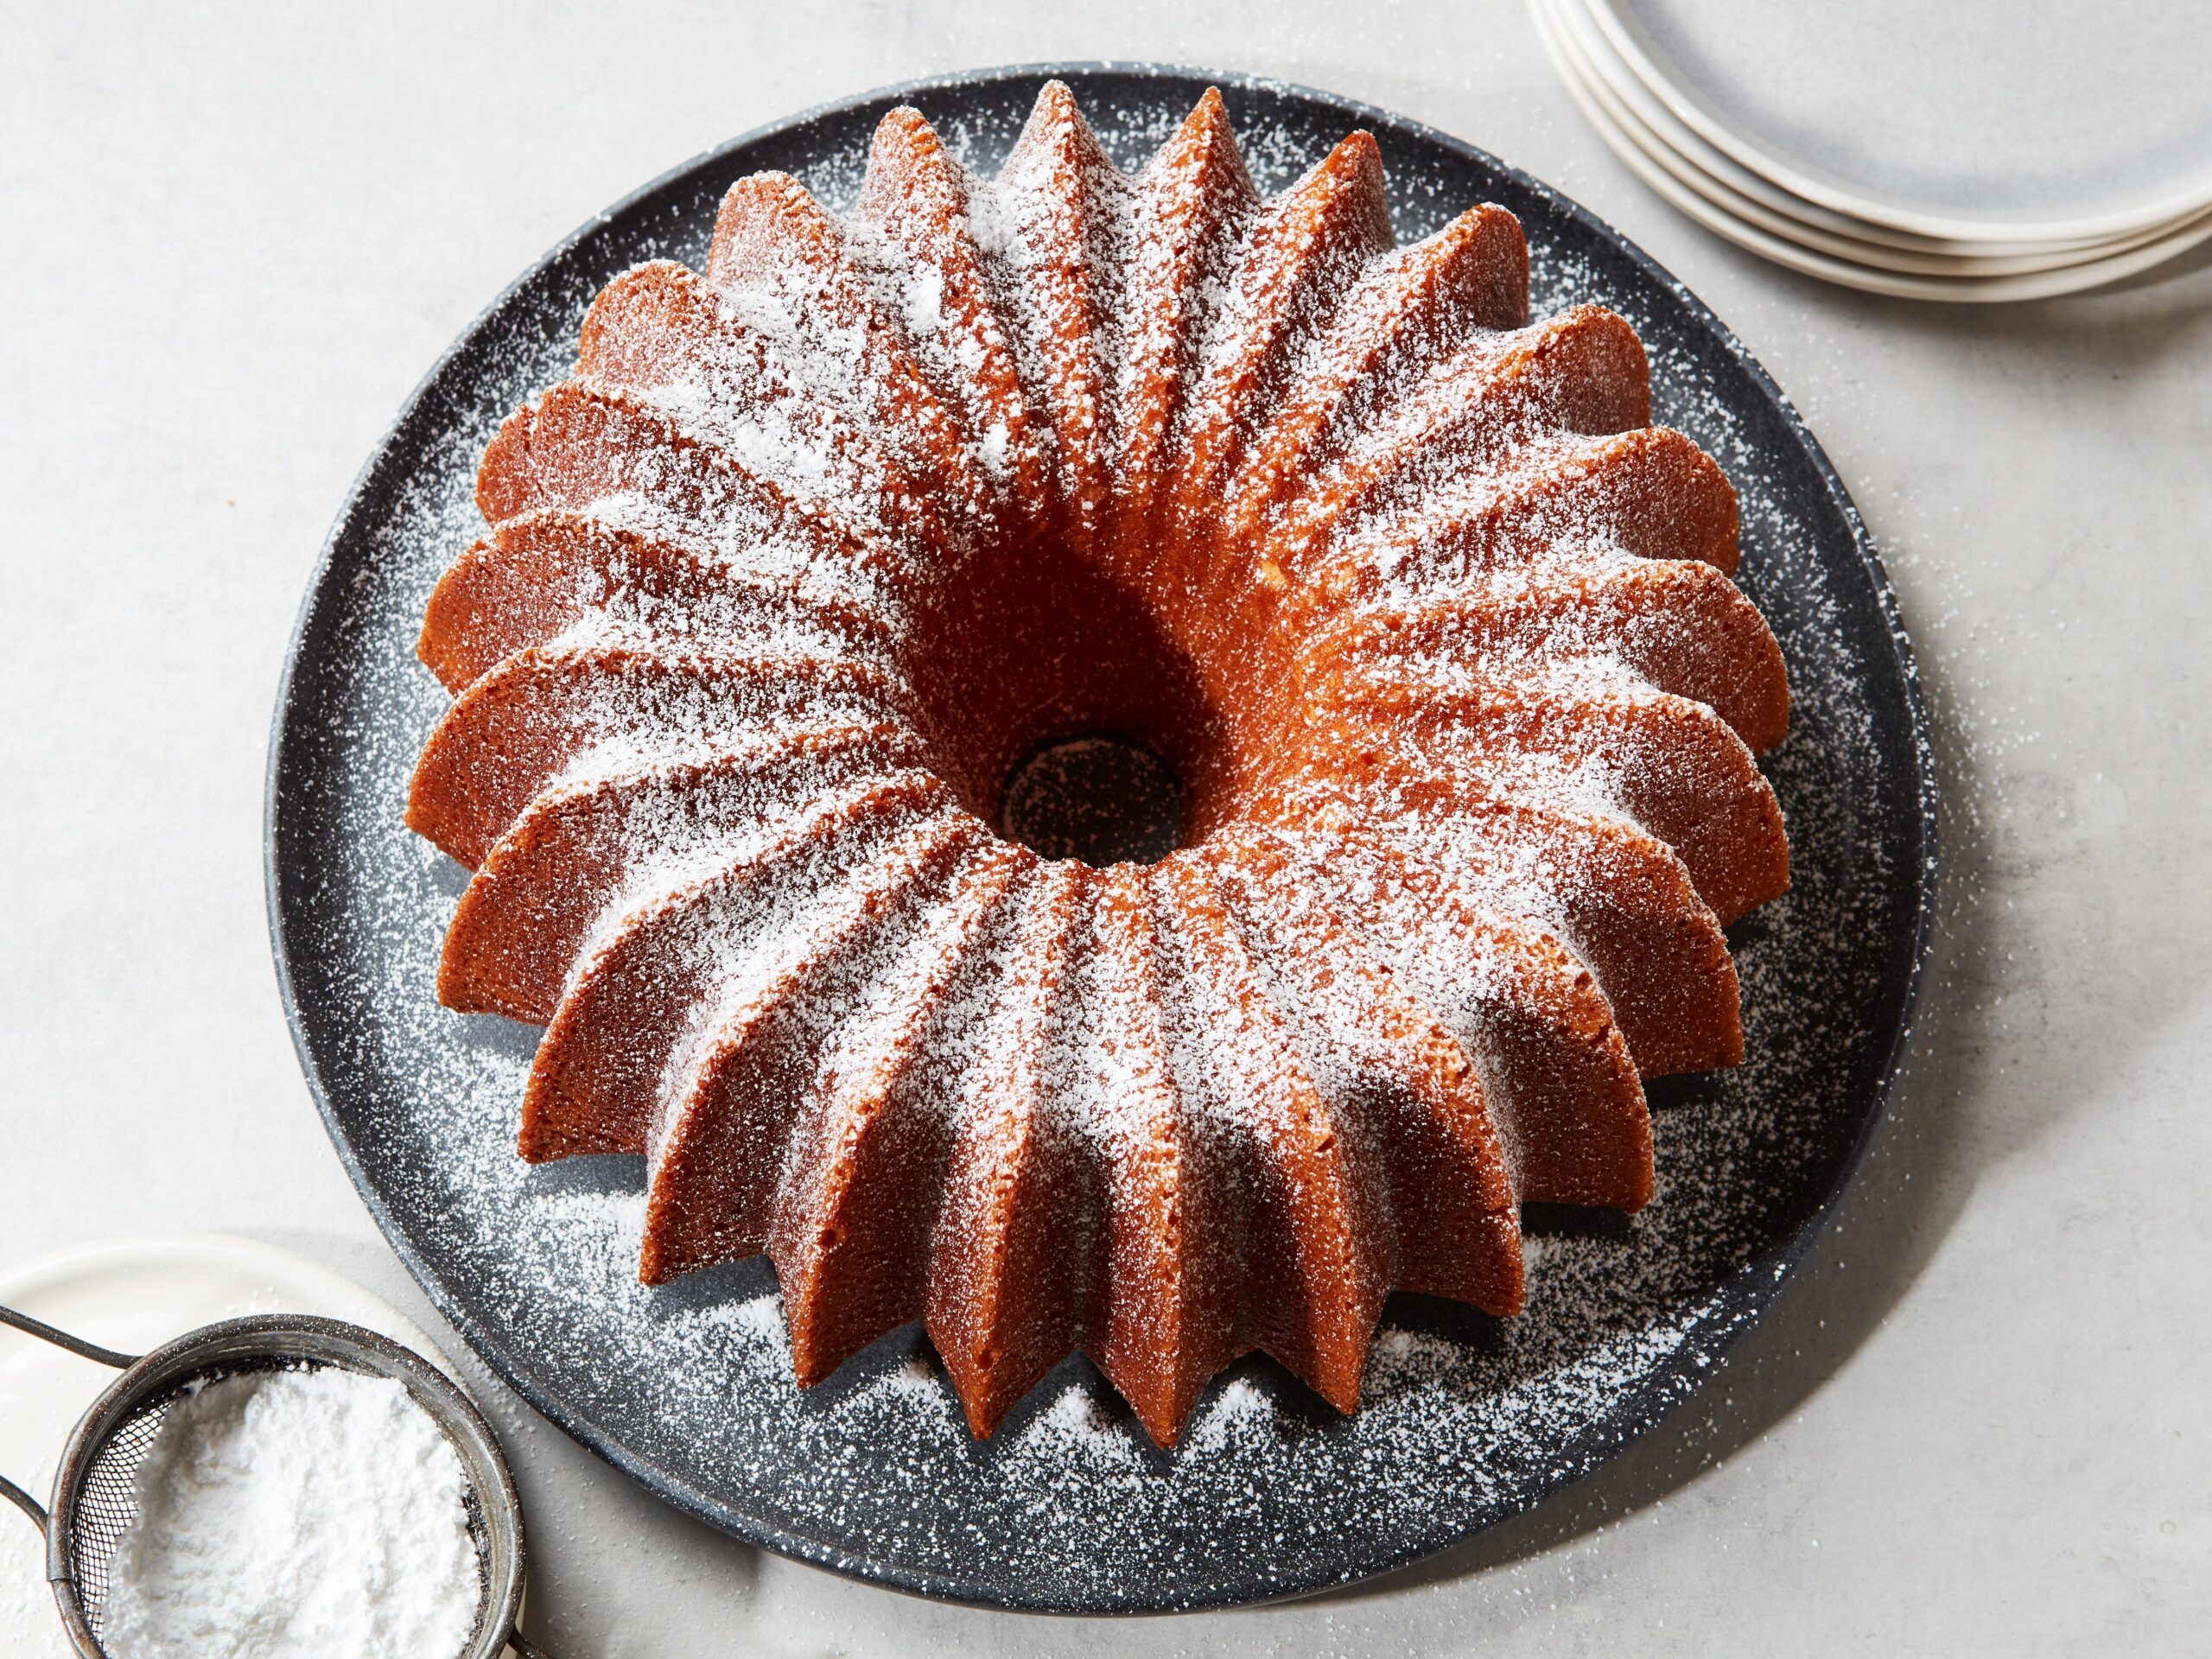  You won't believe how easy it is to make this pound cake!